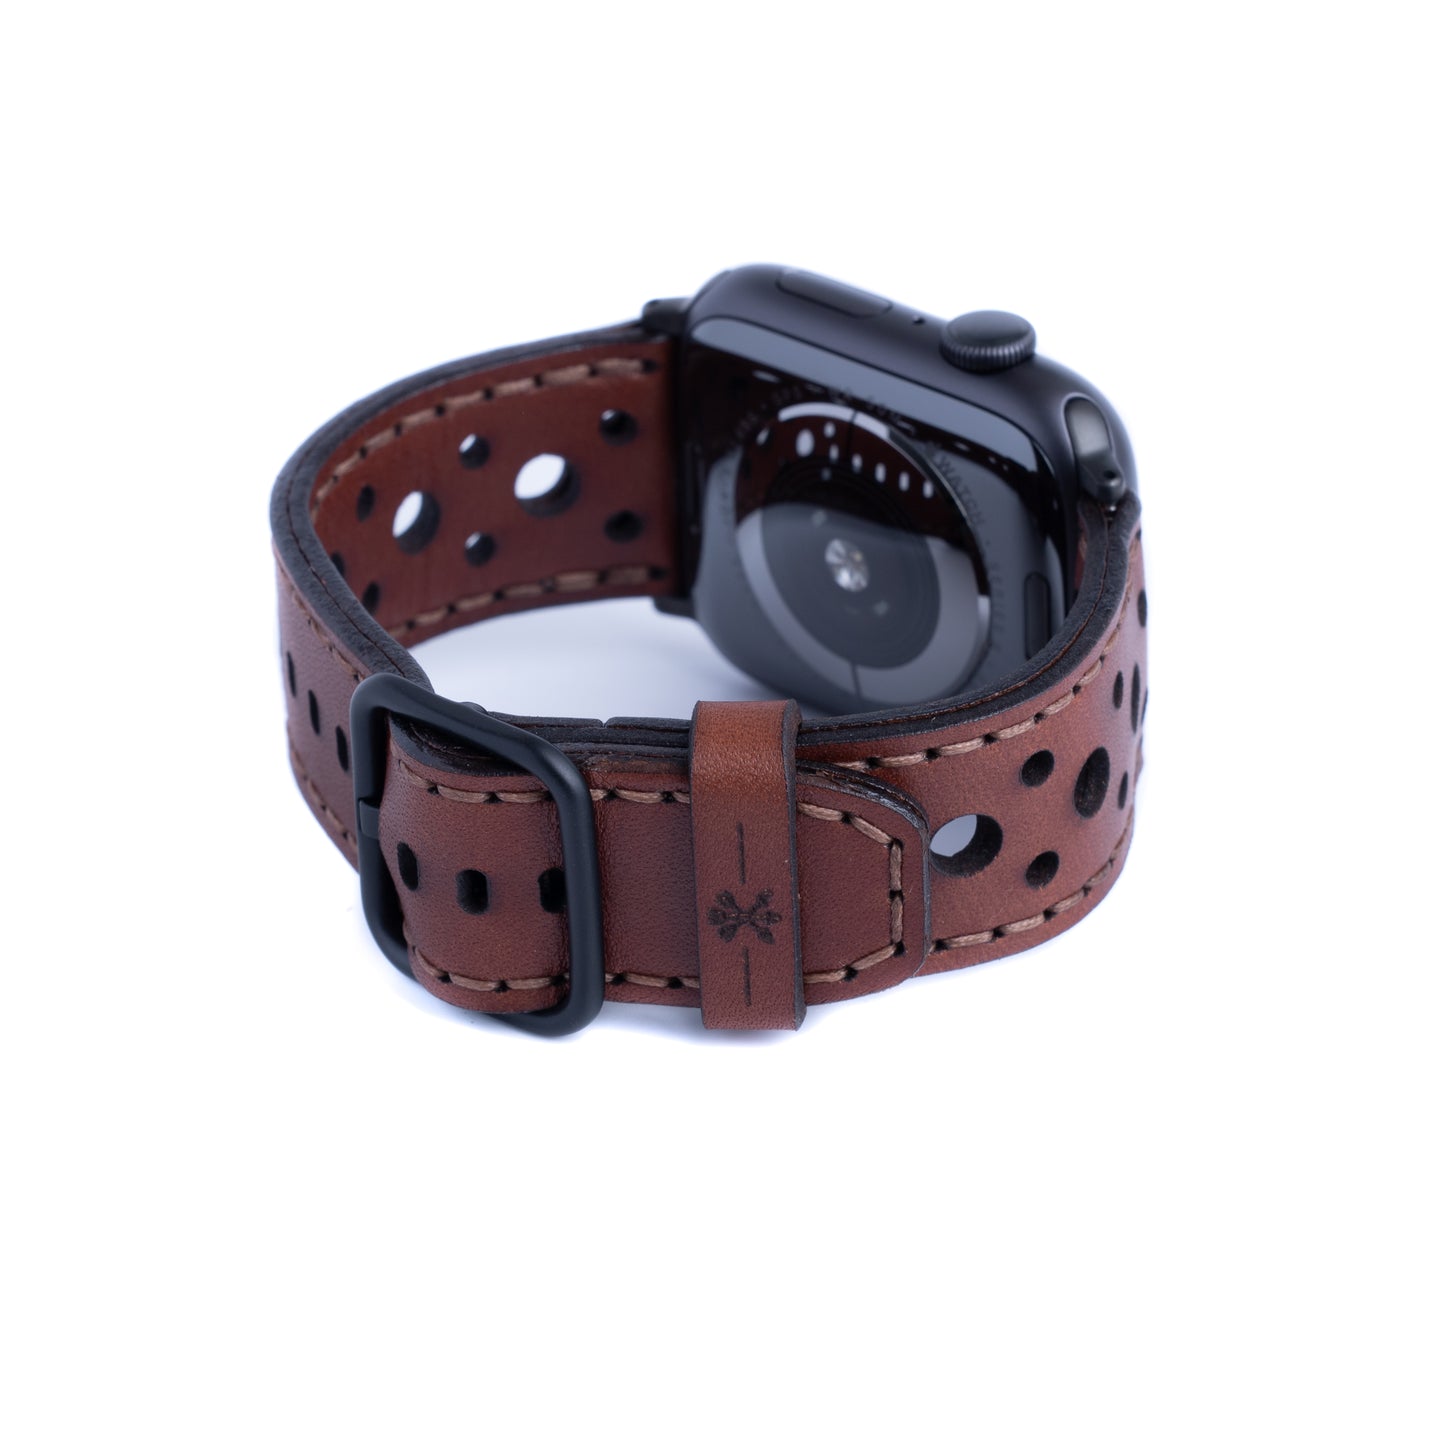 Leather Touring Apple Watch Band - Medium Brown